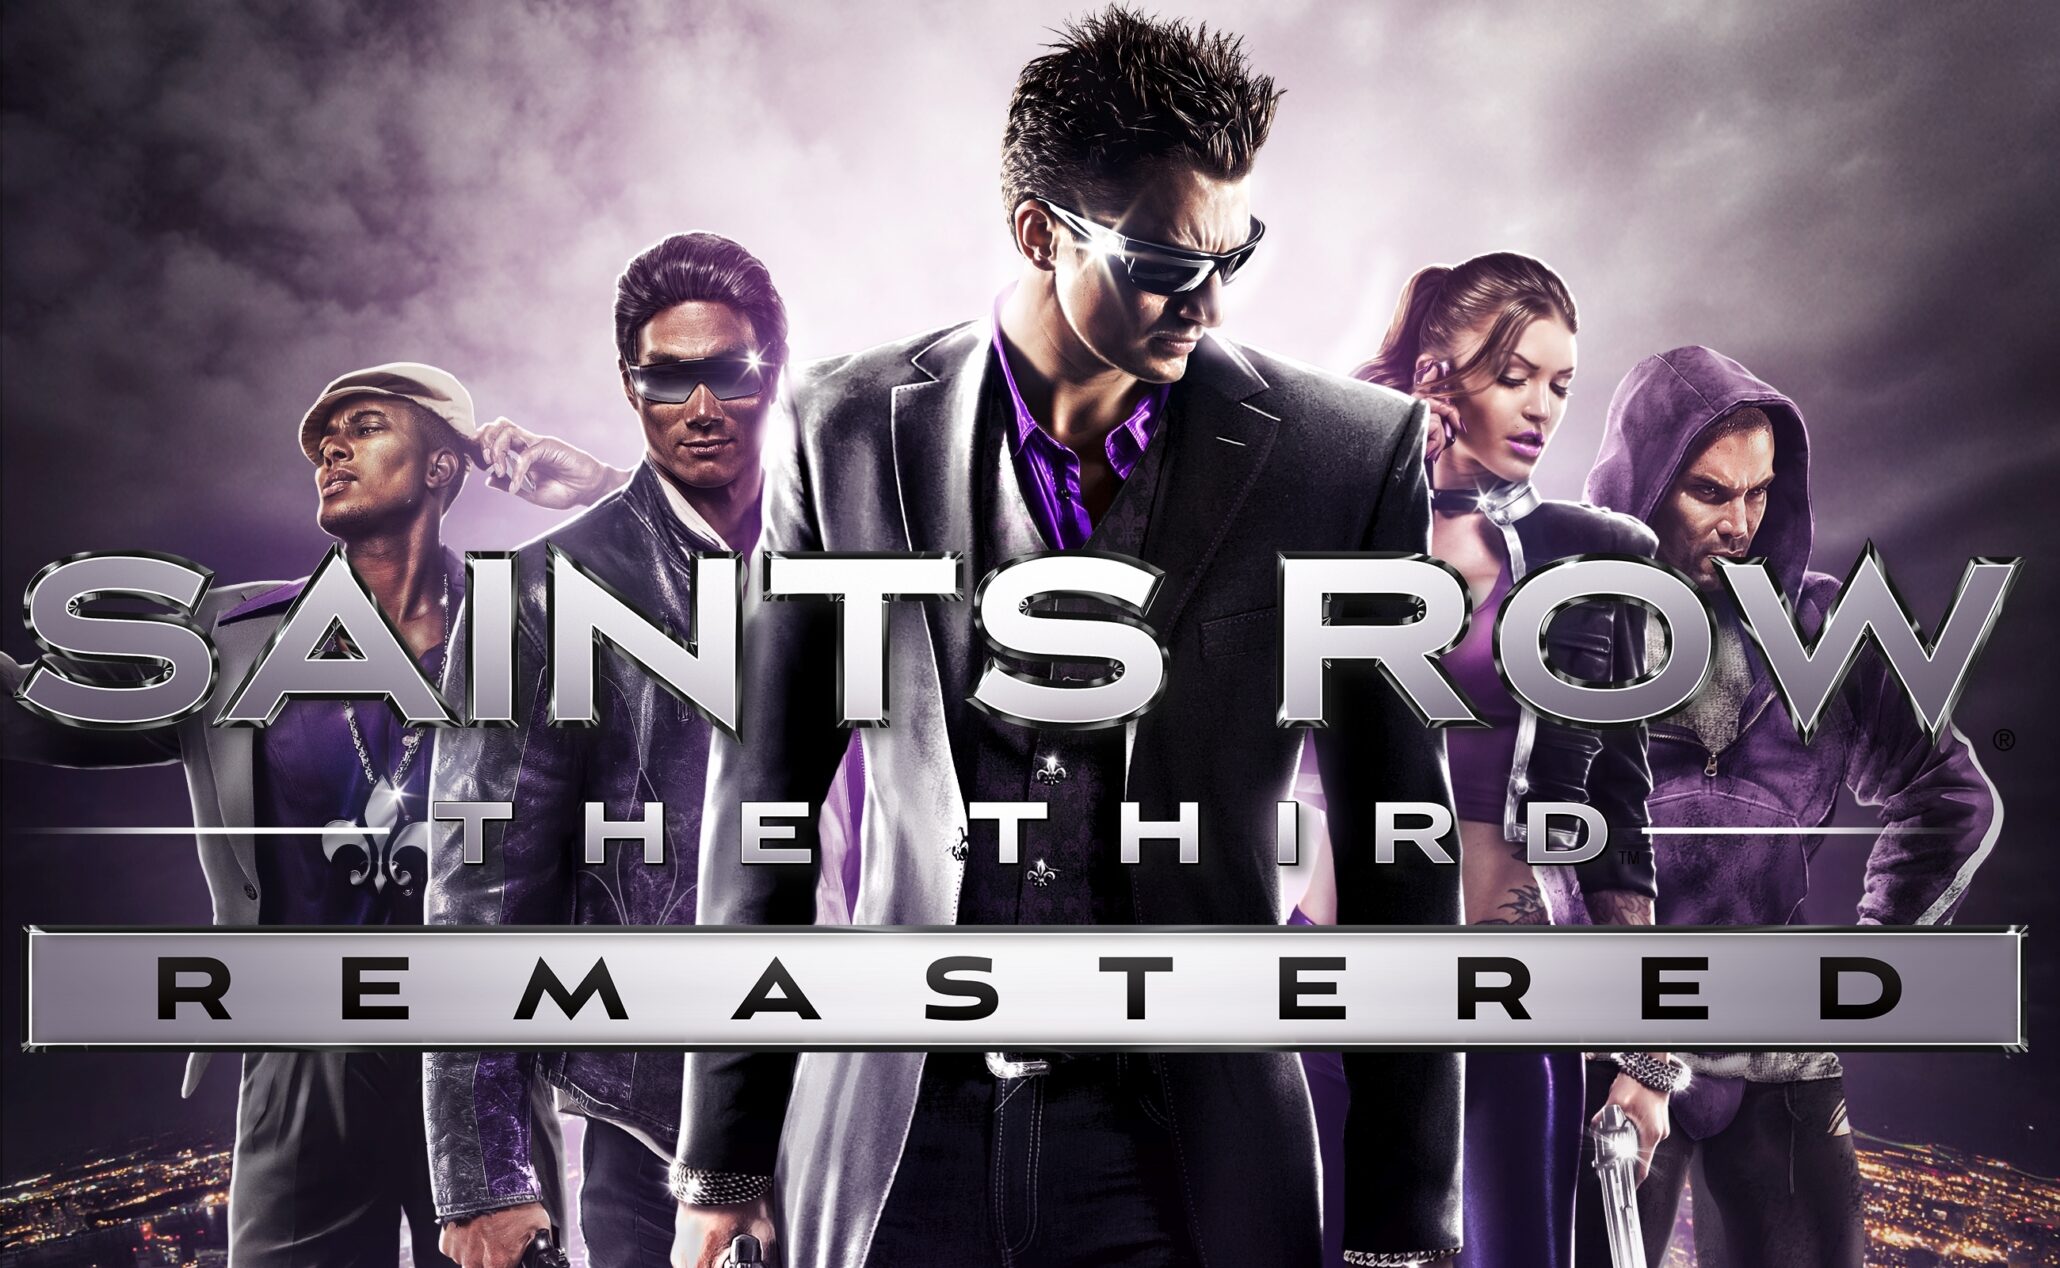 Saints Row: The Third Remastered launch trailer released